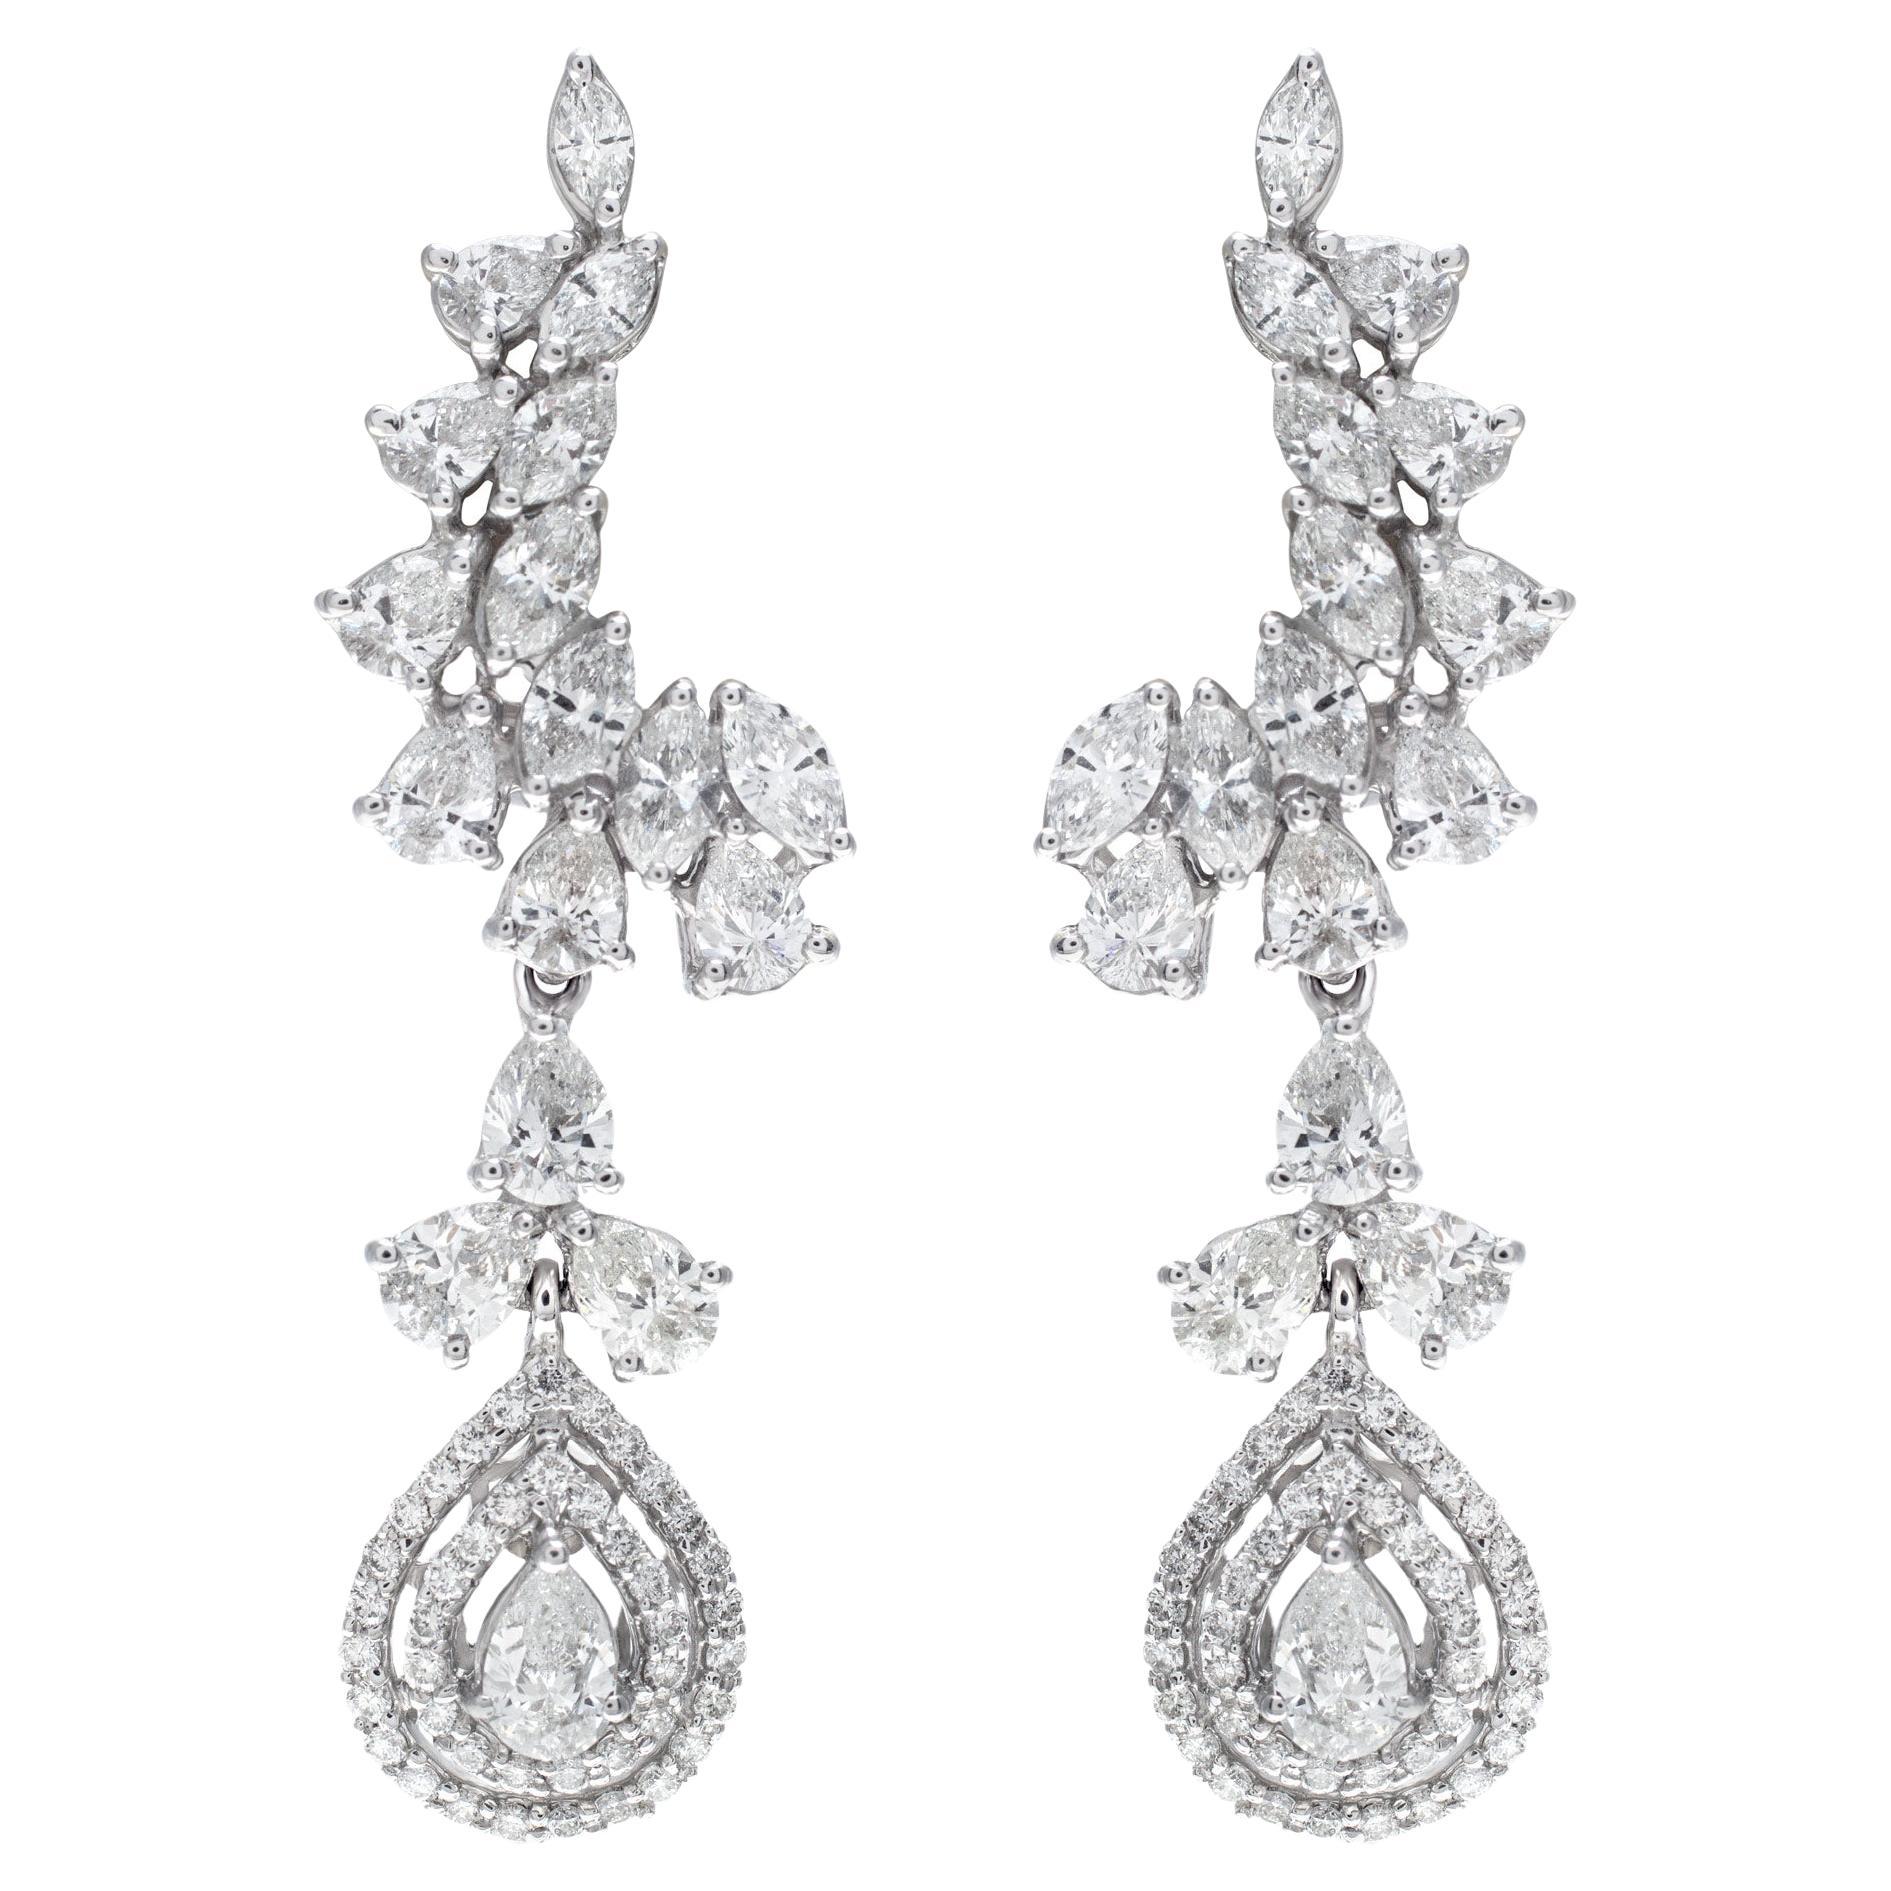 Diamond Drop Earrings Set in 18k White Gold with Approximately 5 Carats